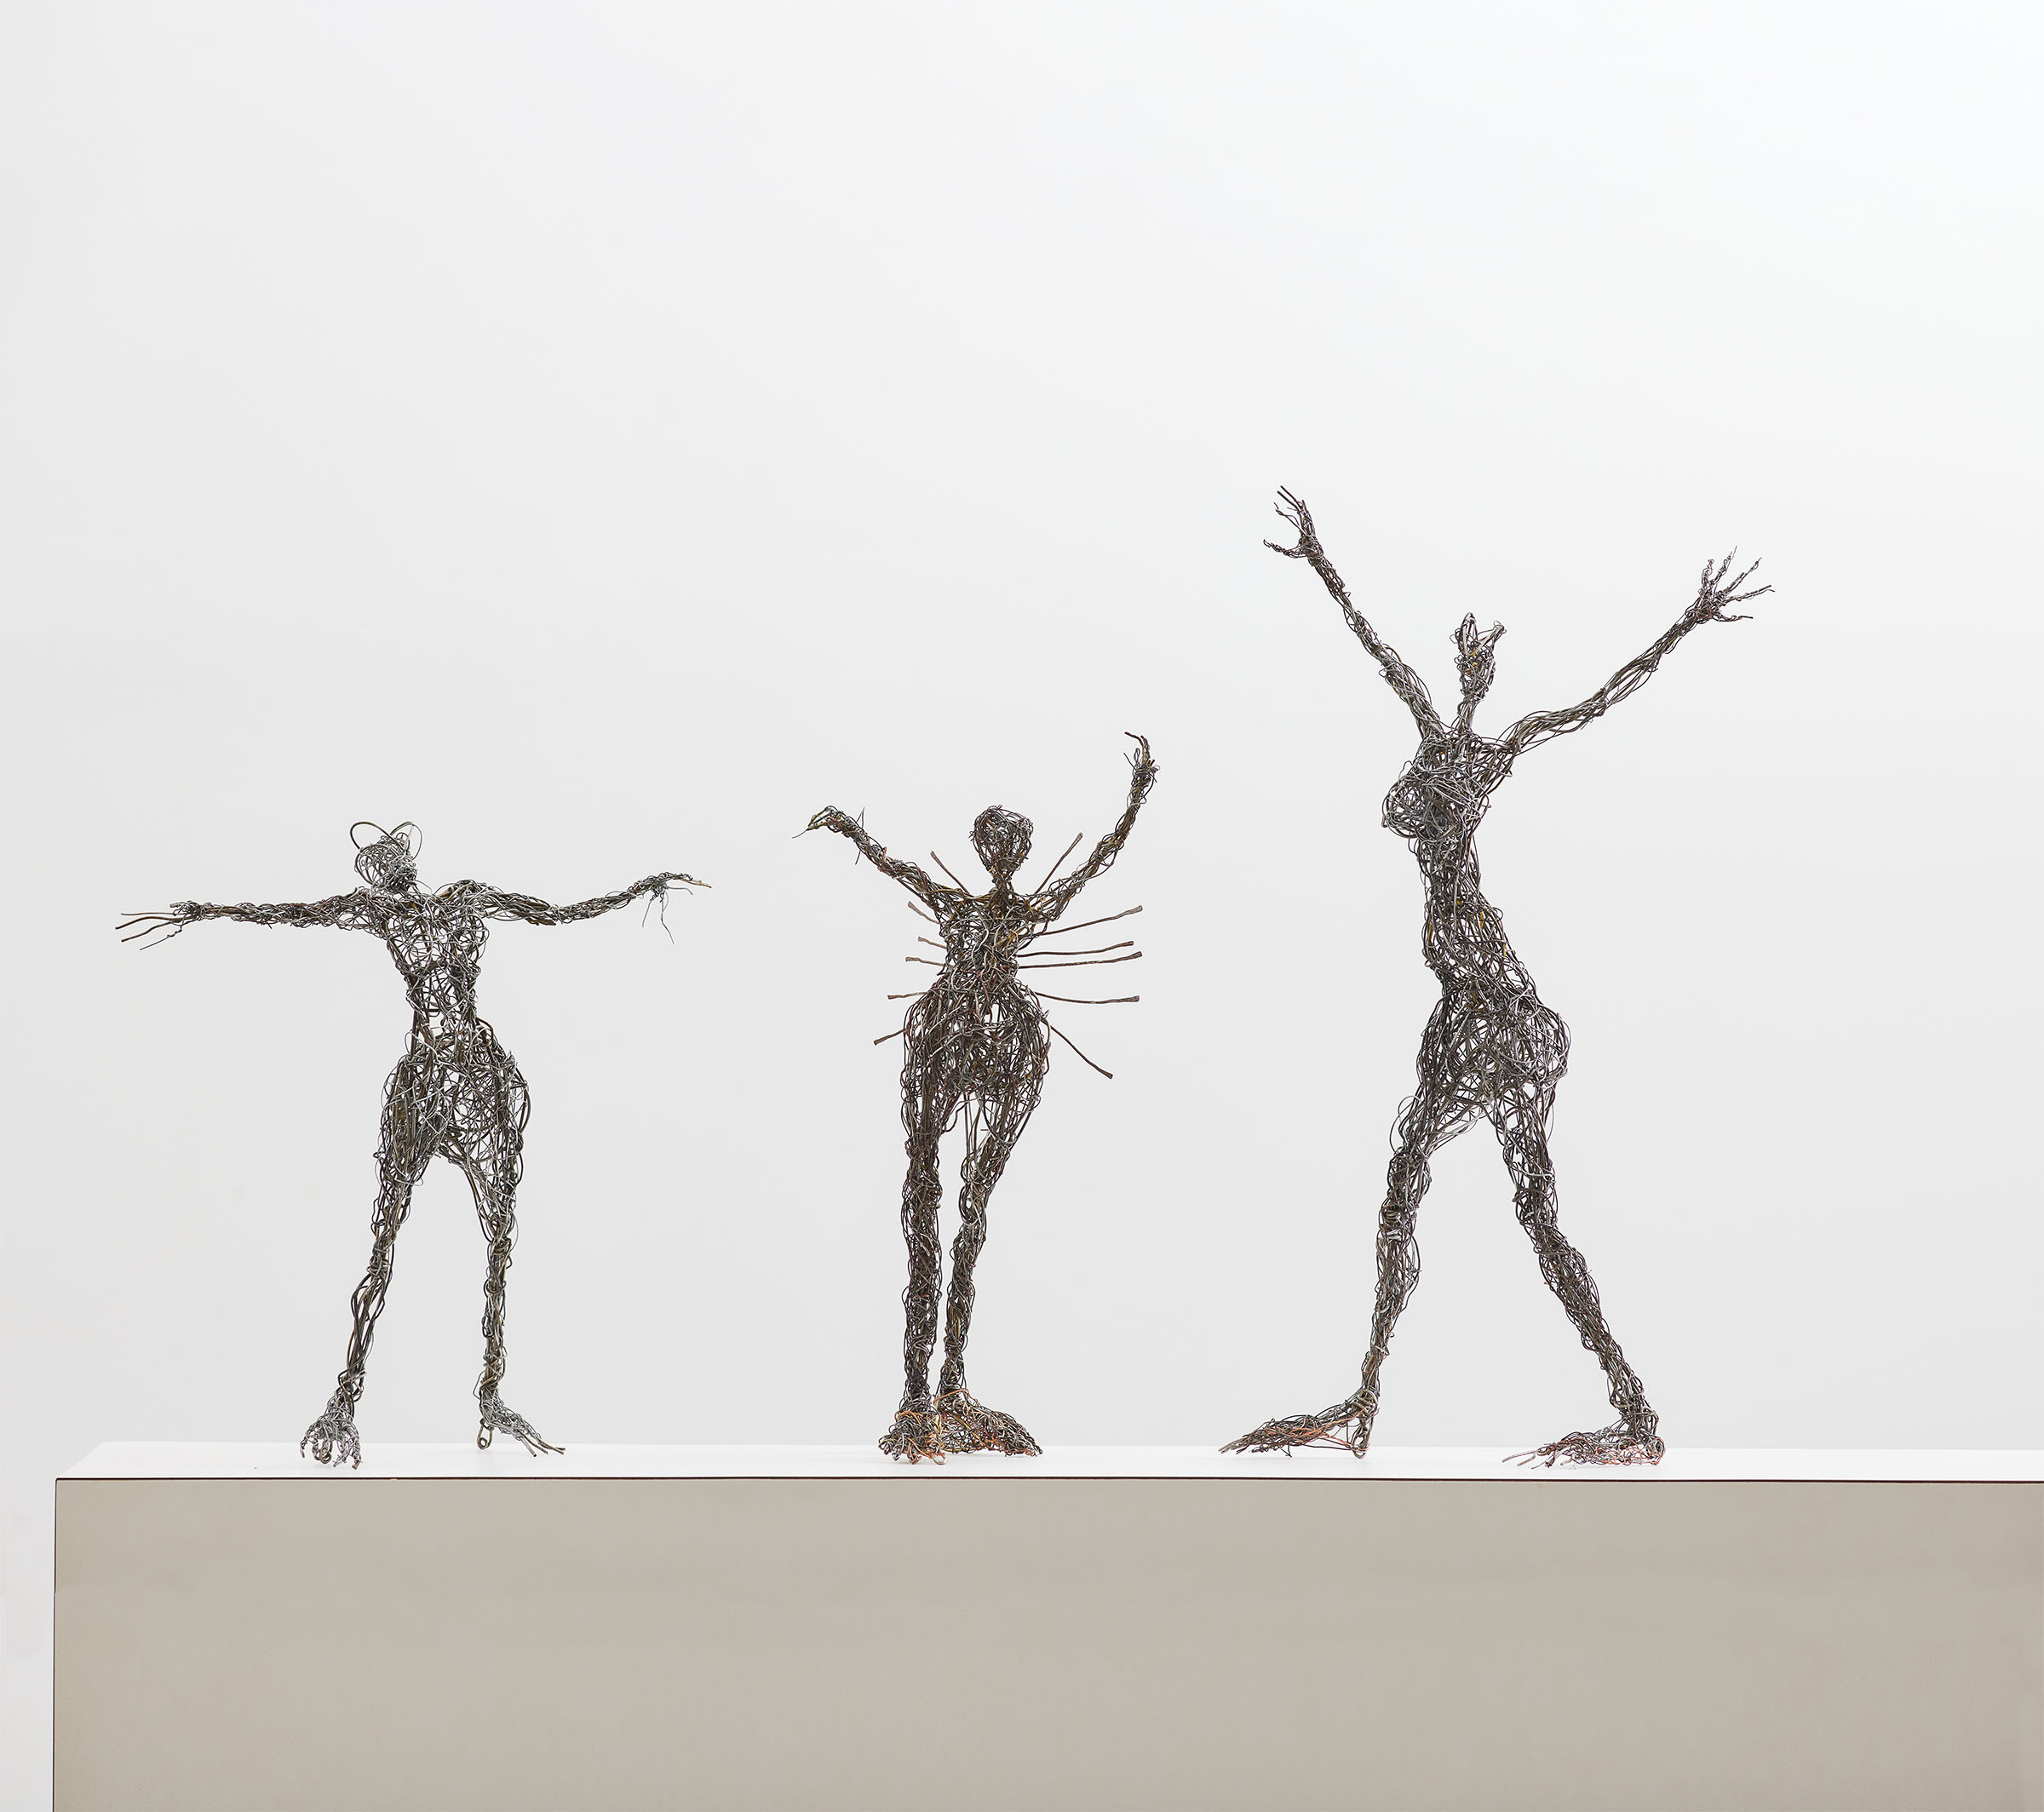 Three thin sculptures on a tan horizon line in front of a light gray background